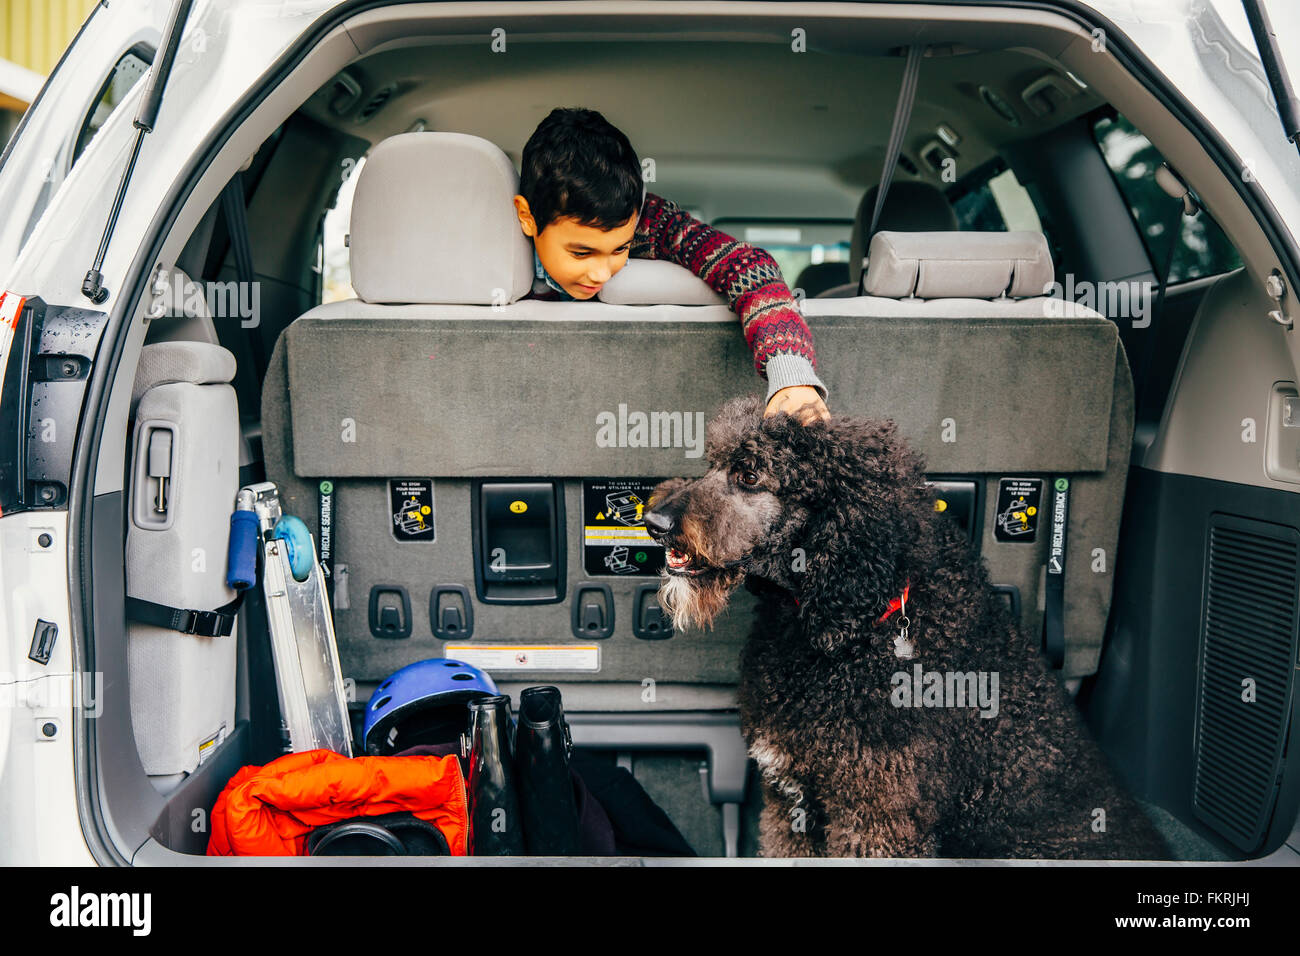 Mixed Race boy petting dog in car hatch Banque D'Images